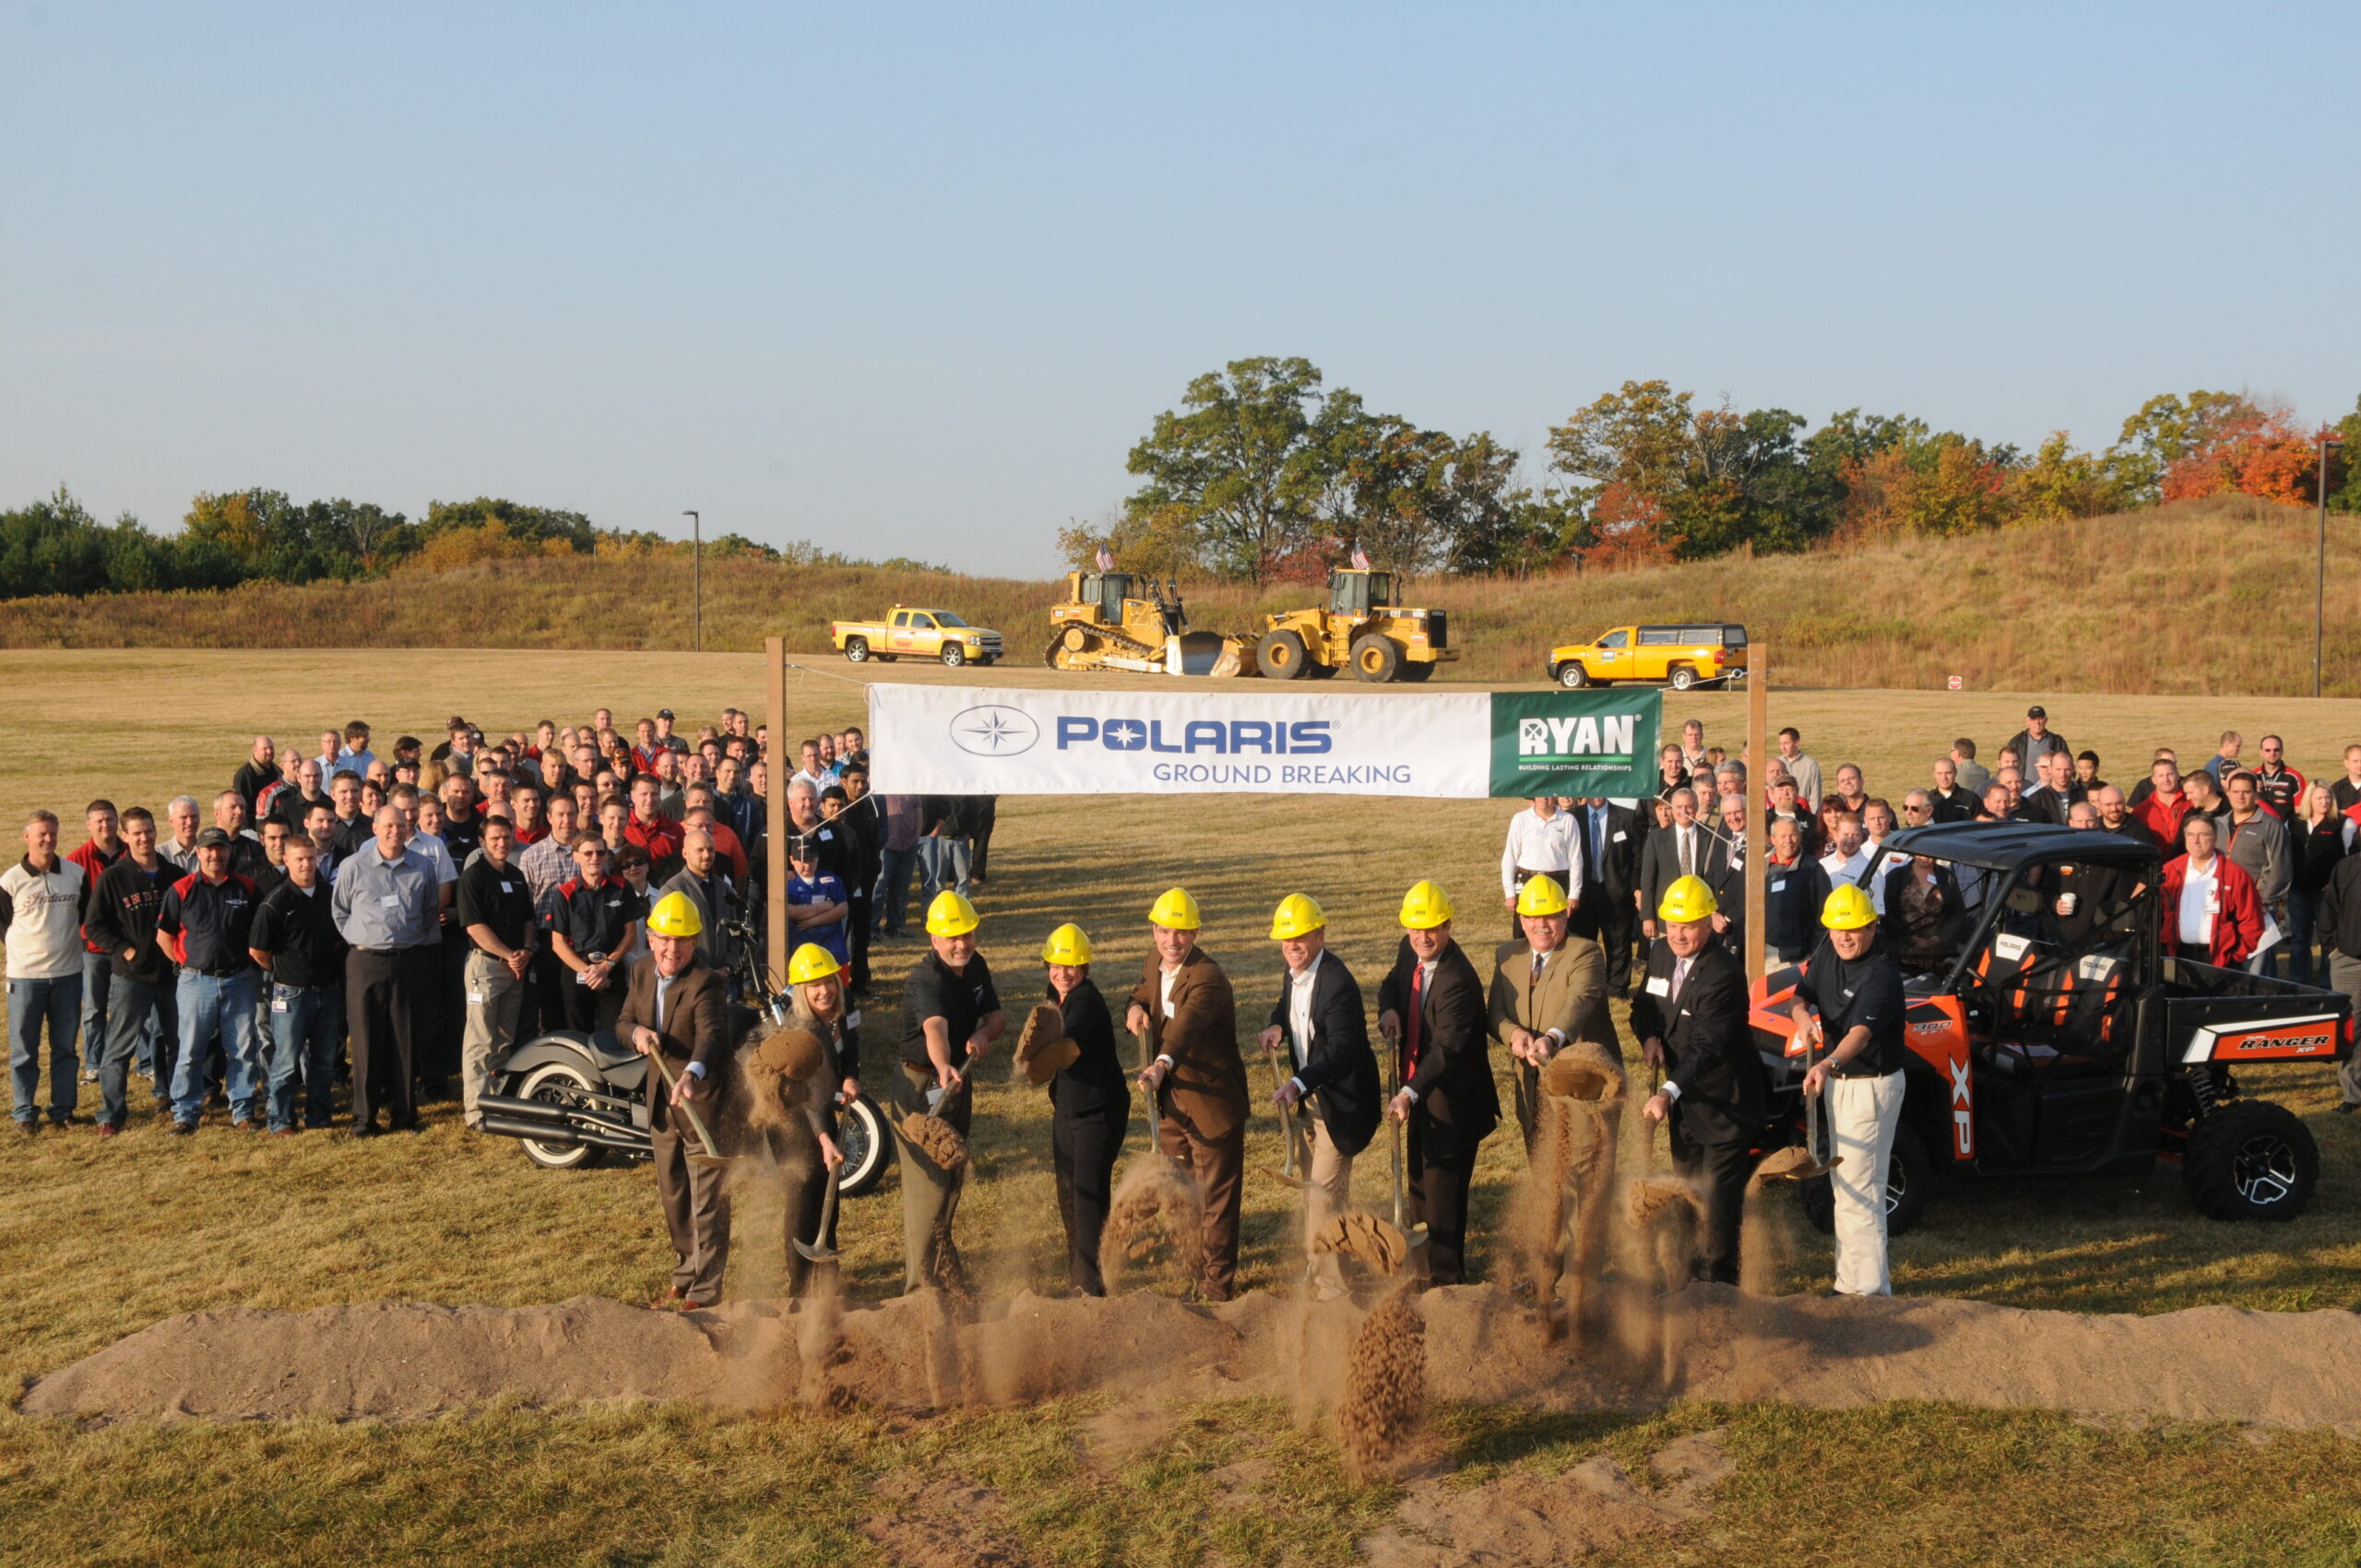 Polaris Breaks Ground On Major Facility Expansion – Company’s Product Development Center In Wyoming, Minn. Will More Than Double In Square Footage